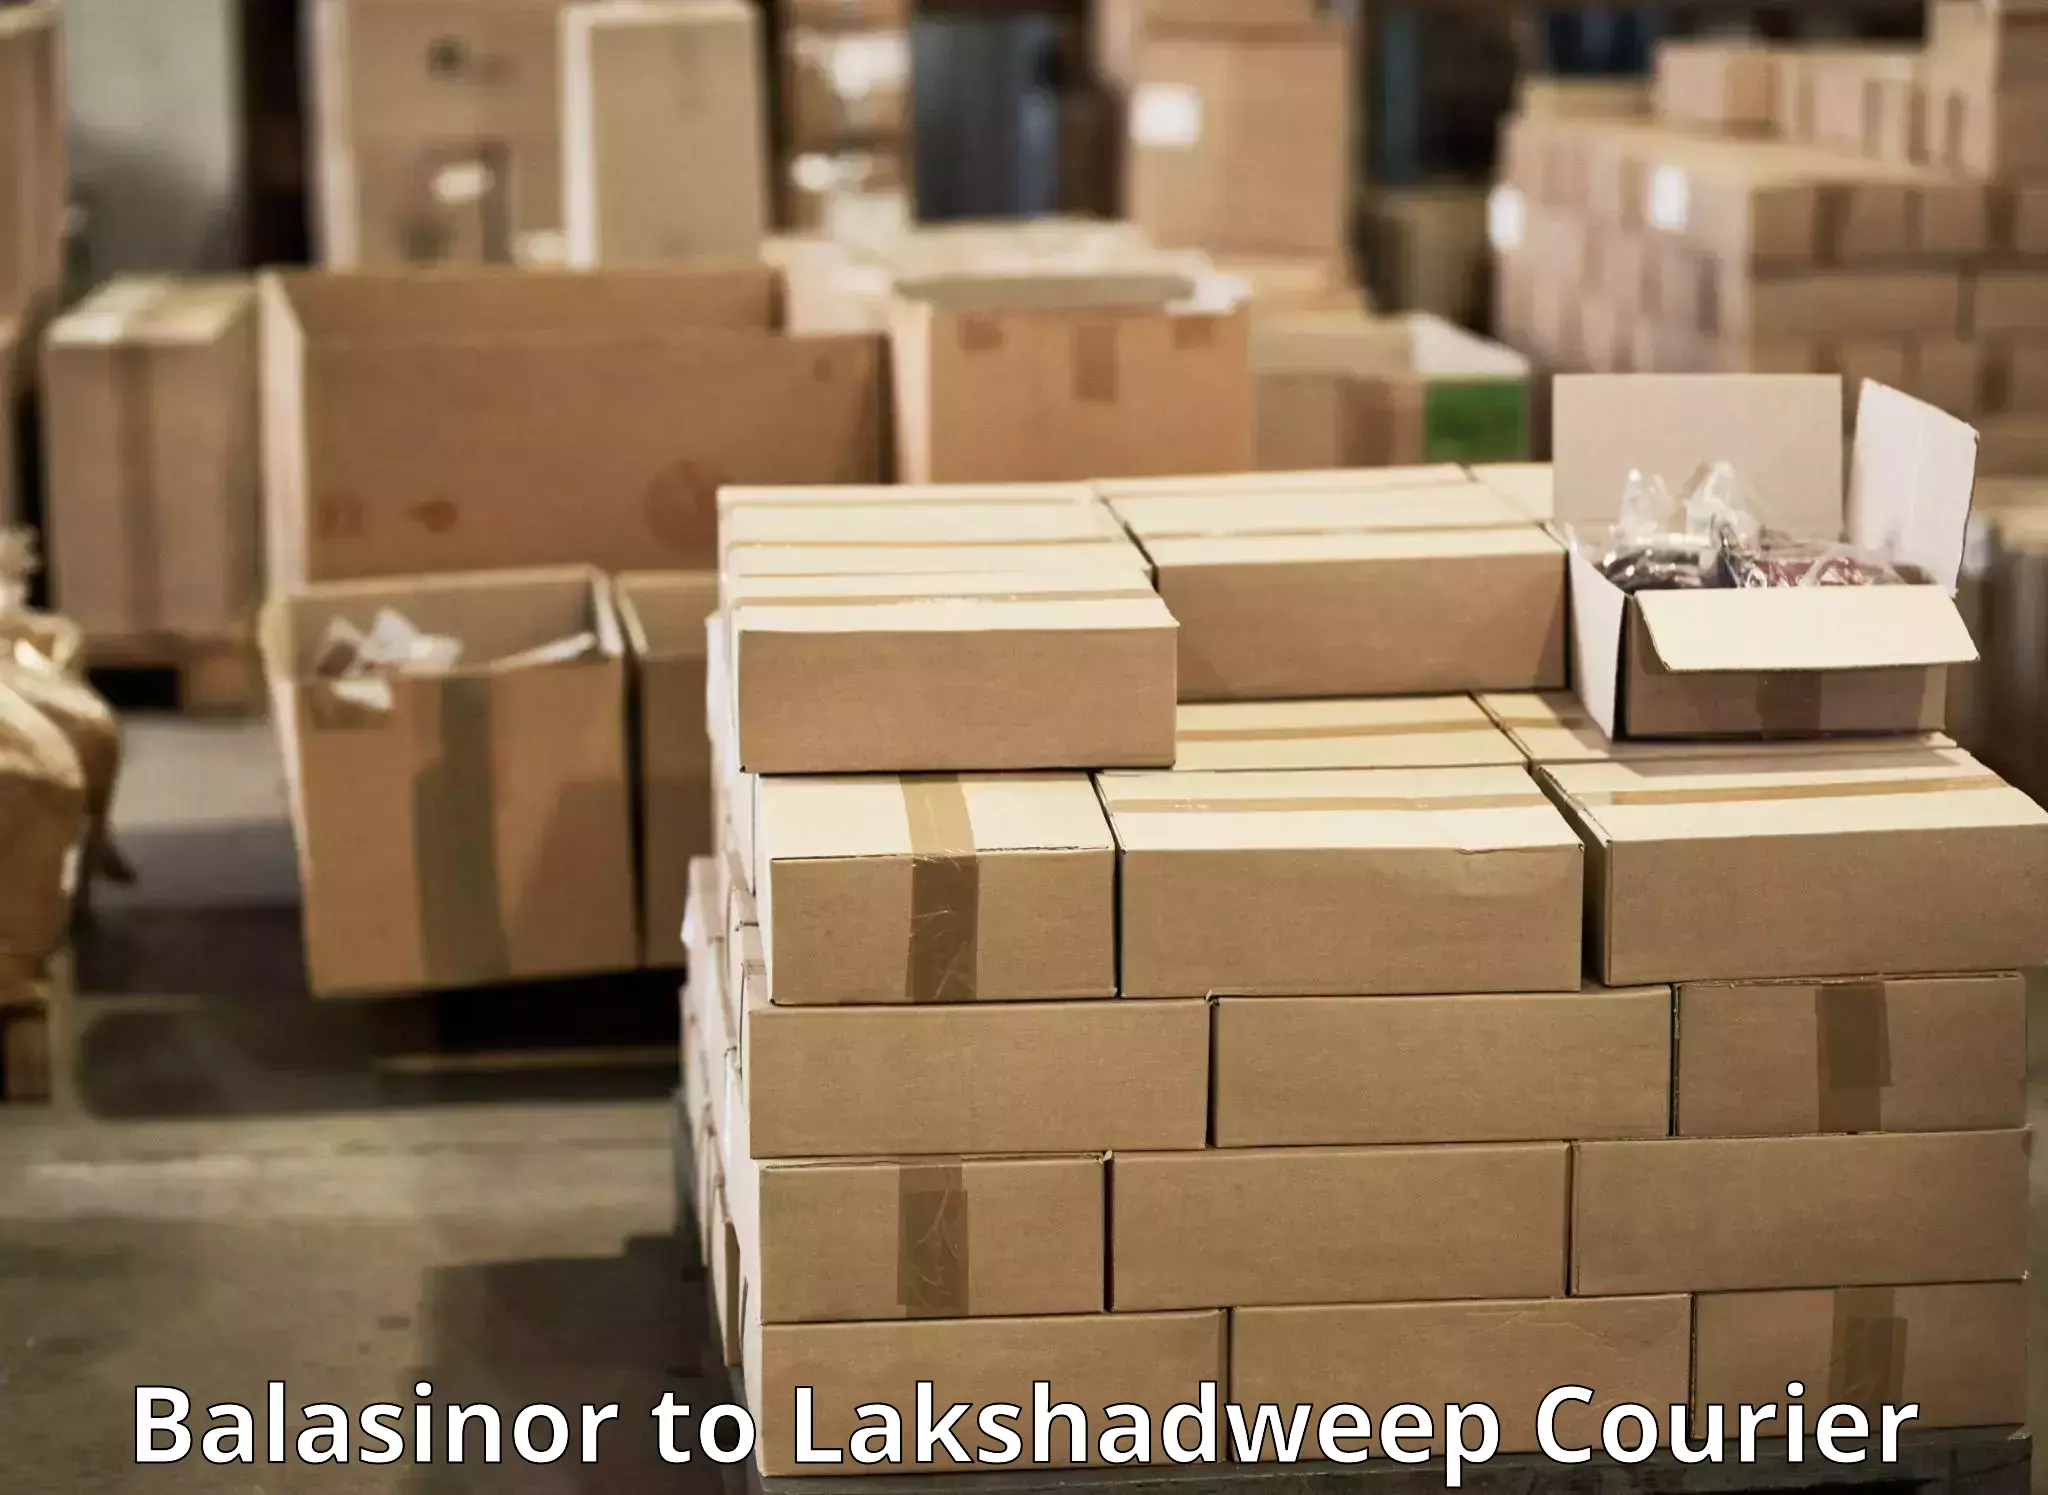 State-of-the-art courier technology Balasinor to Lakshadweep